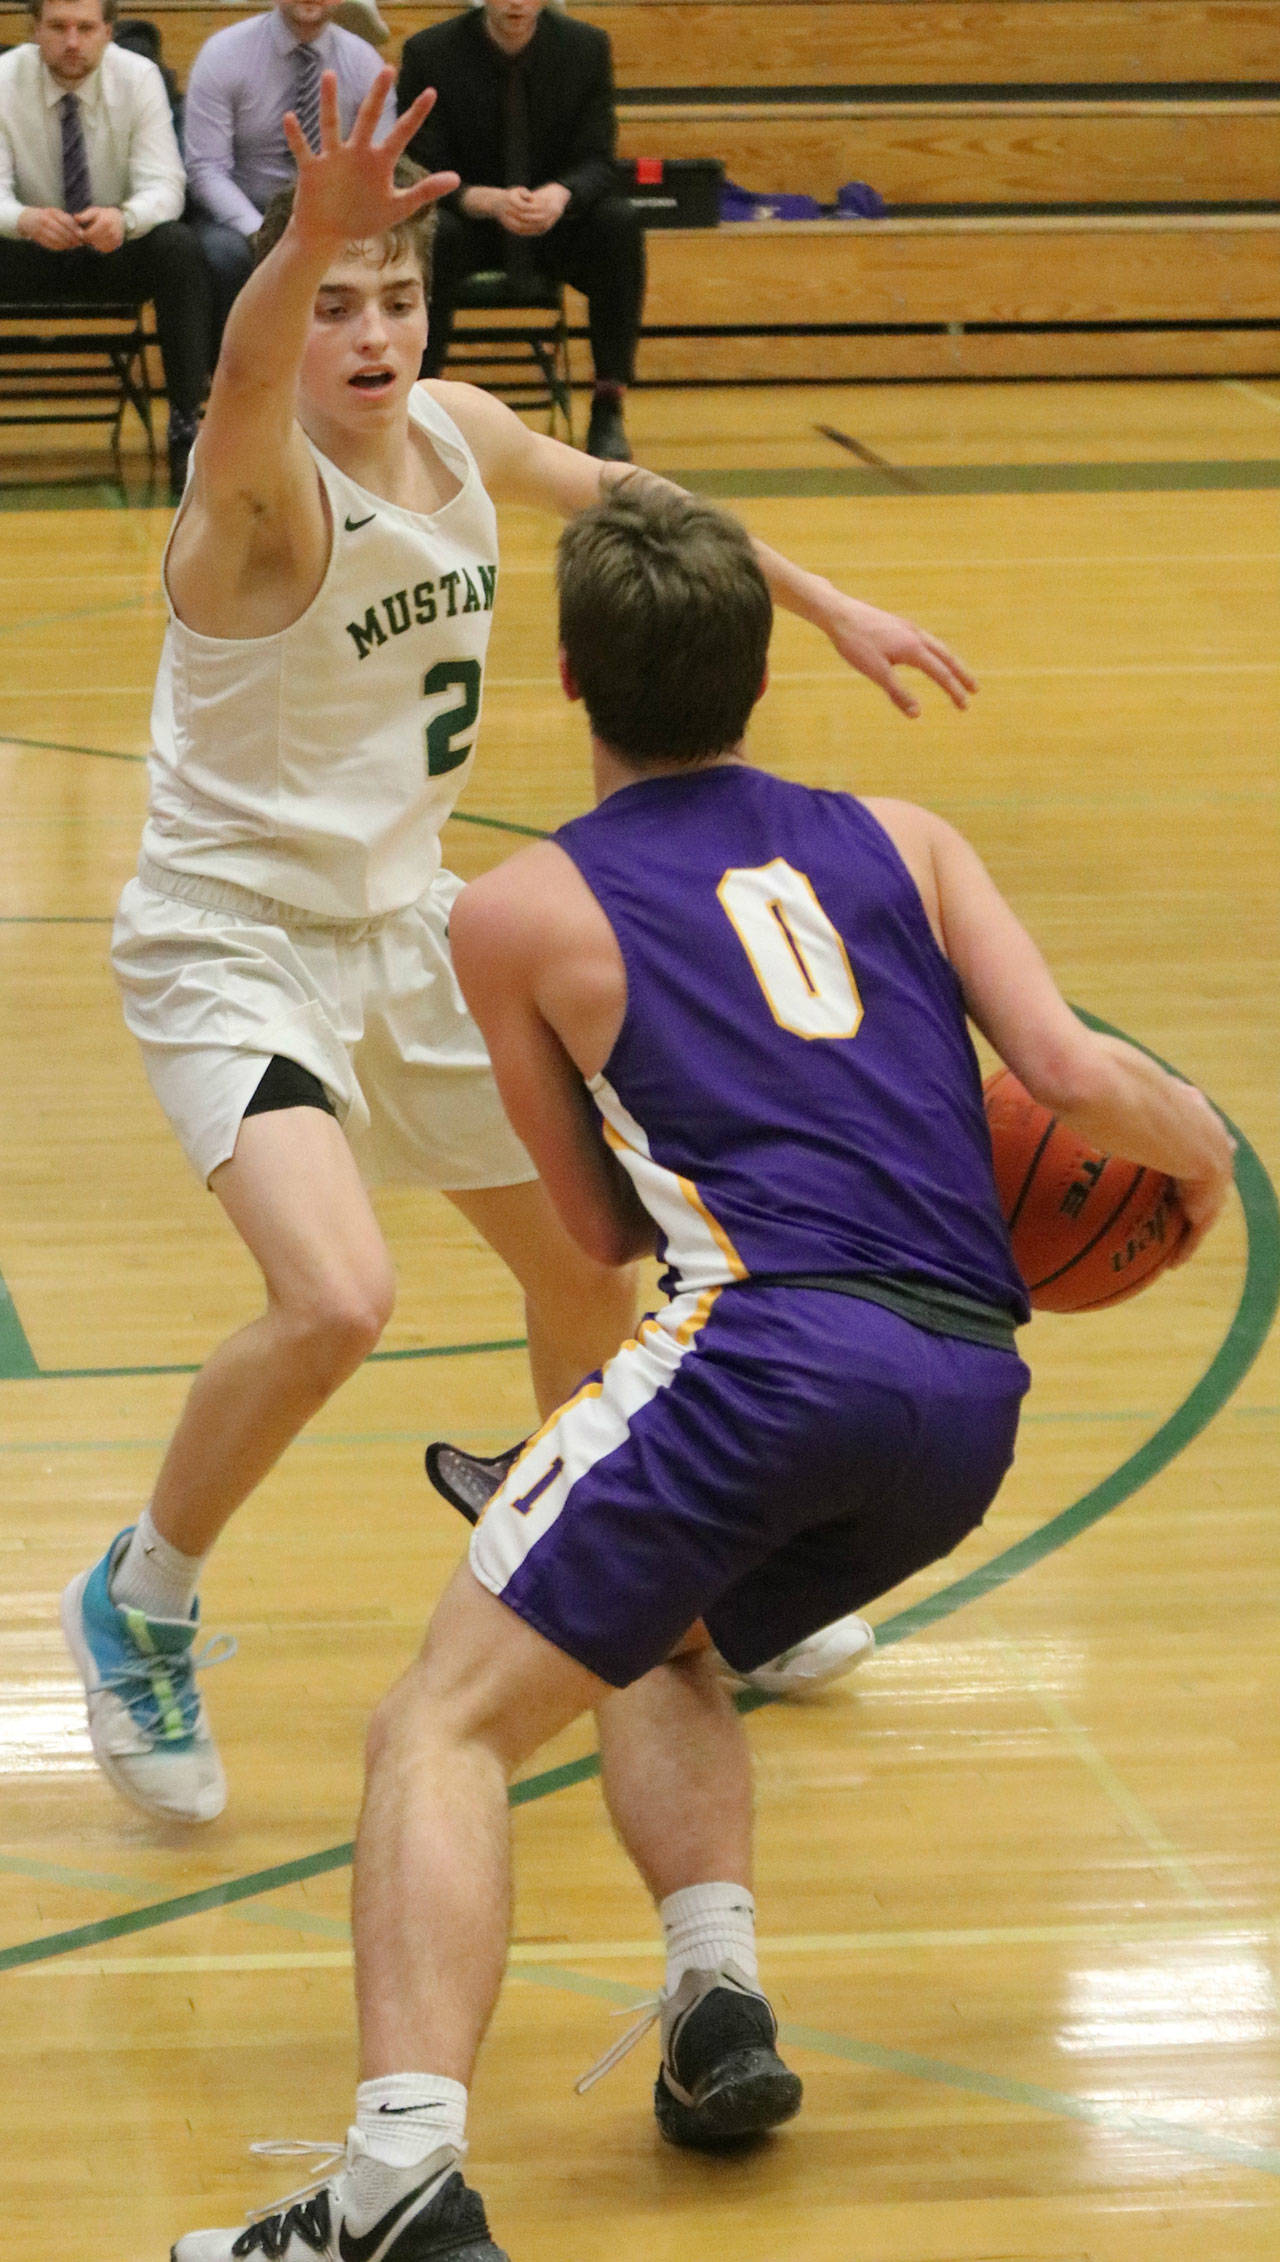 Redmond’s Nathan Miller defends Issaquah’s Tommy Reisner. Andy Nystrom/ staff photo